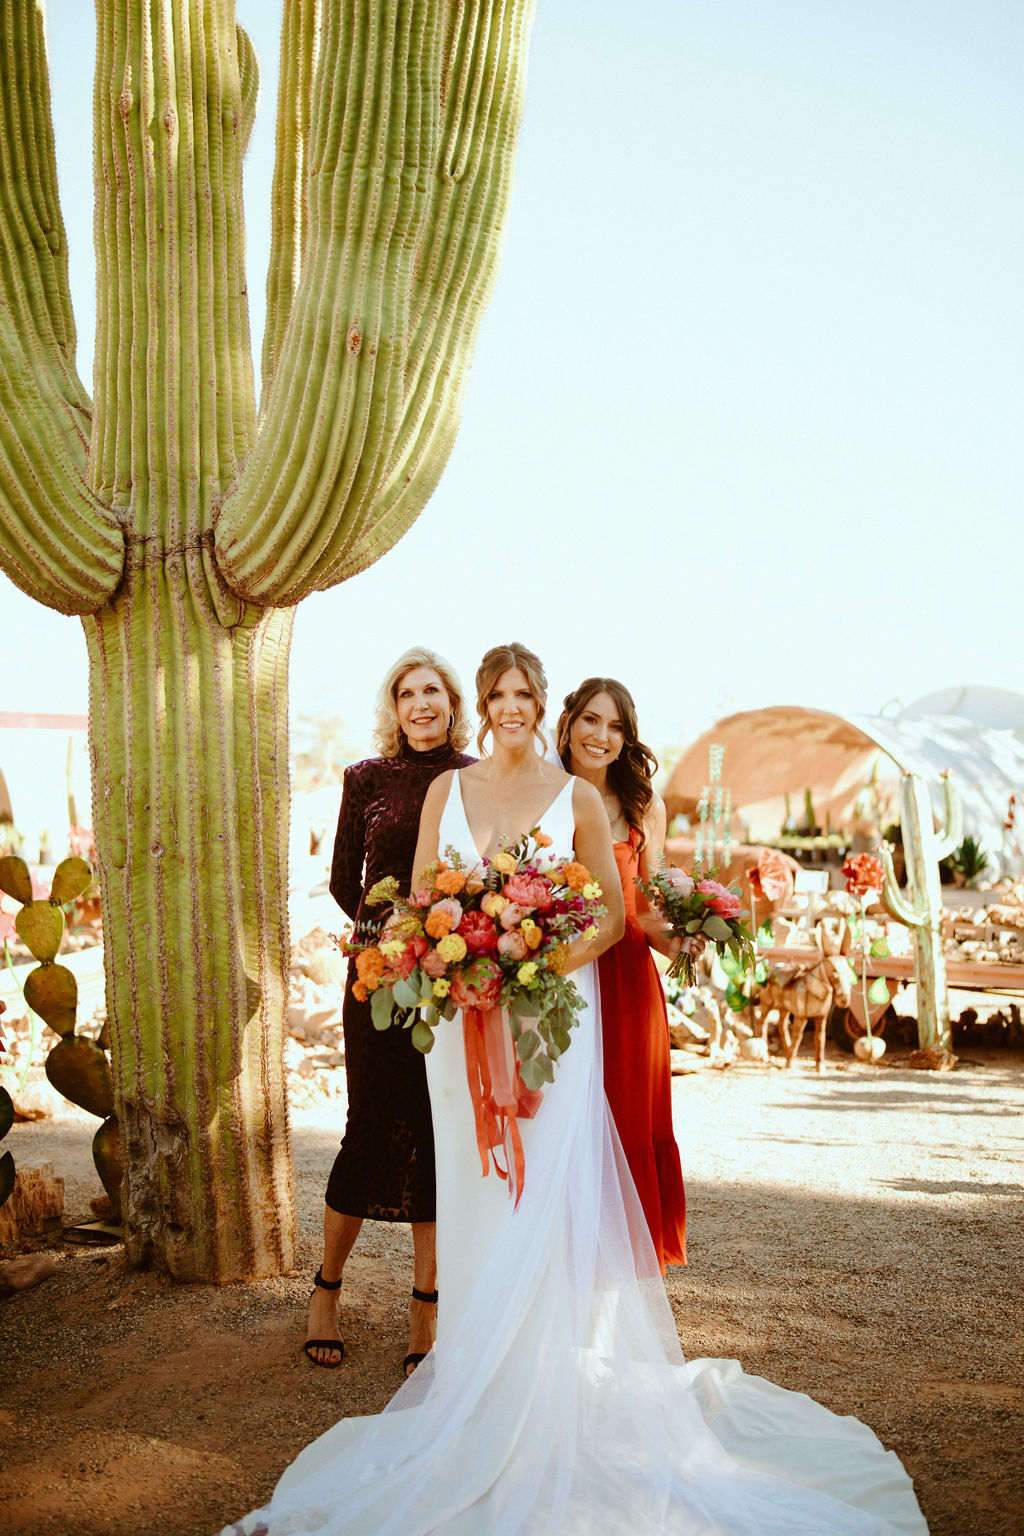 Bride with Guests next to Huge Cactus in Las Vegas 